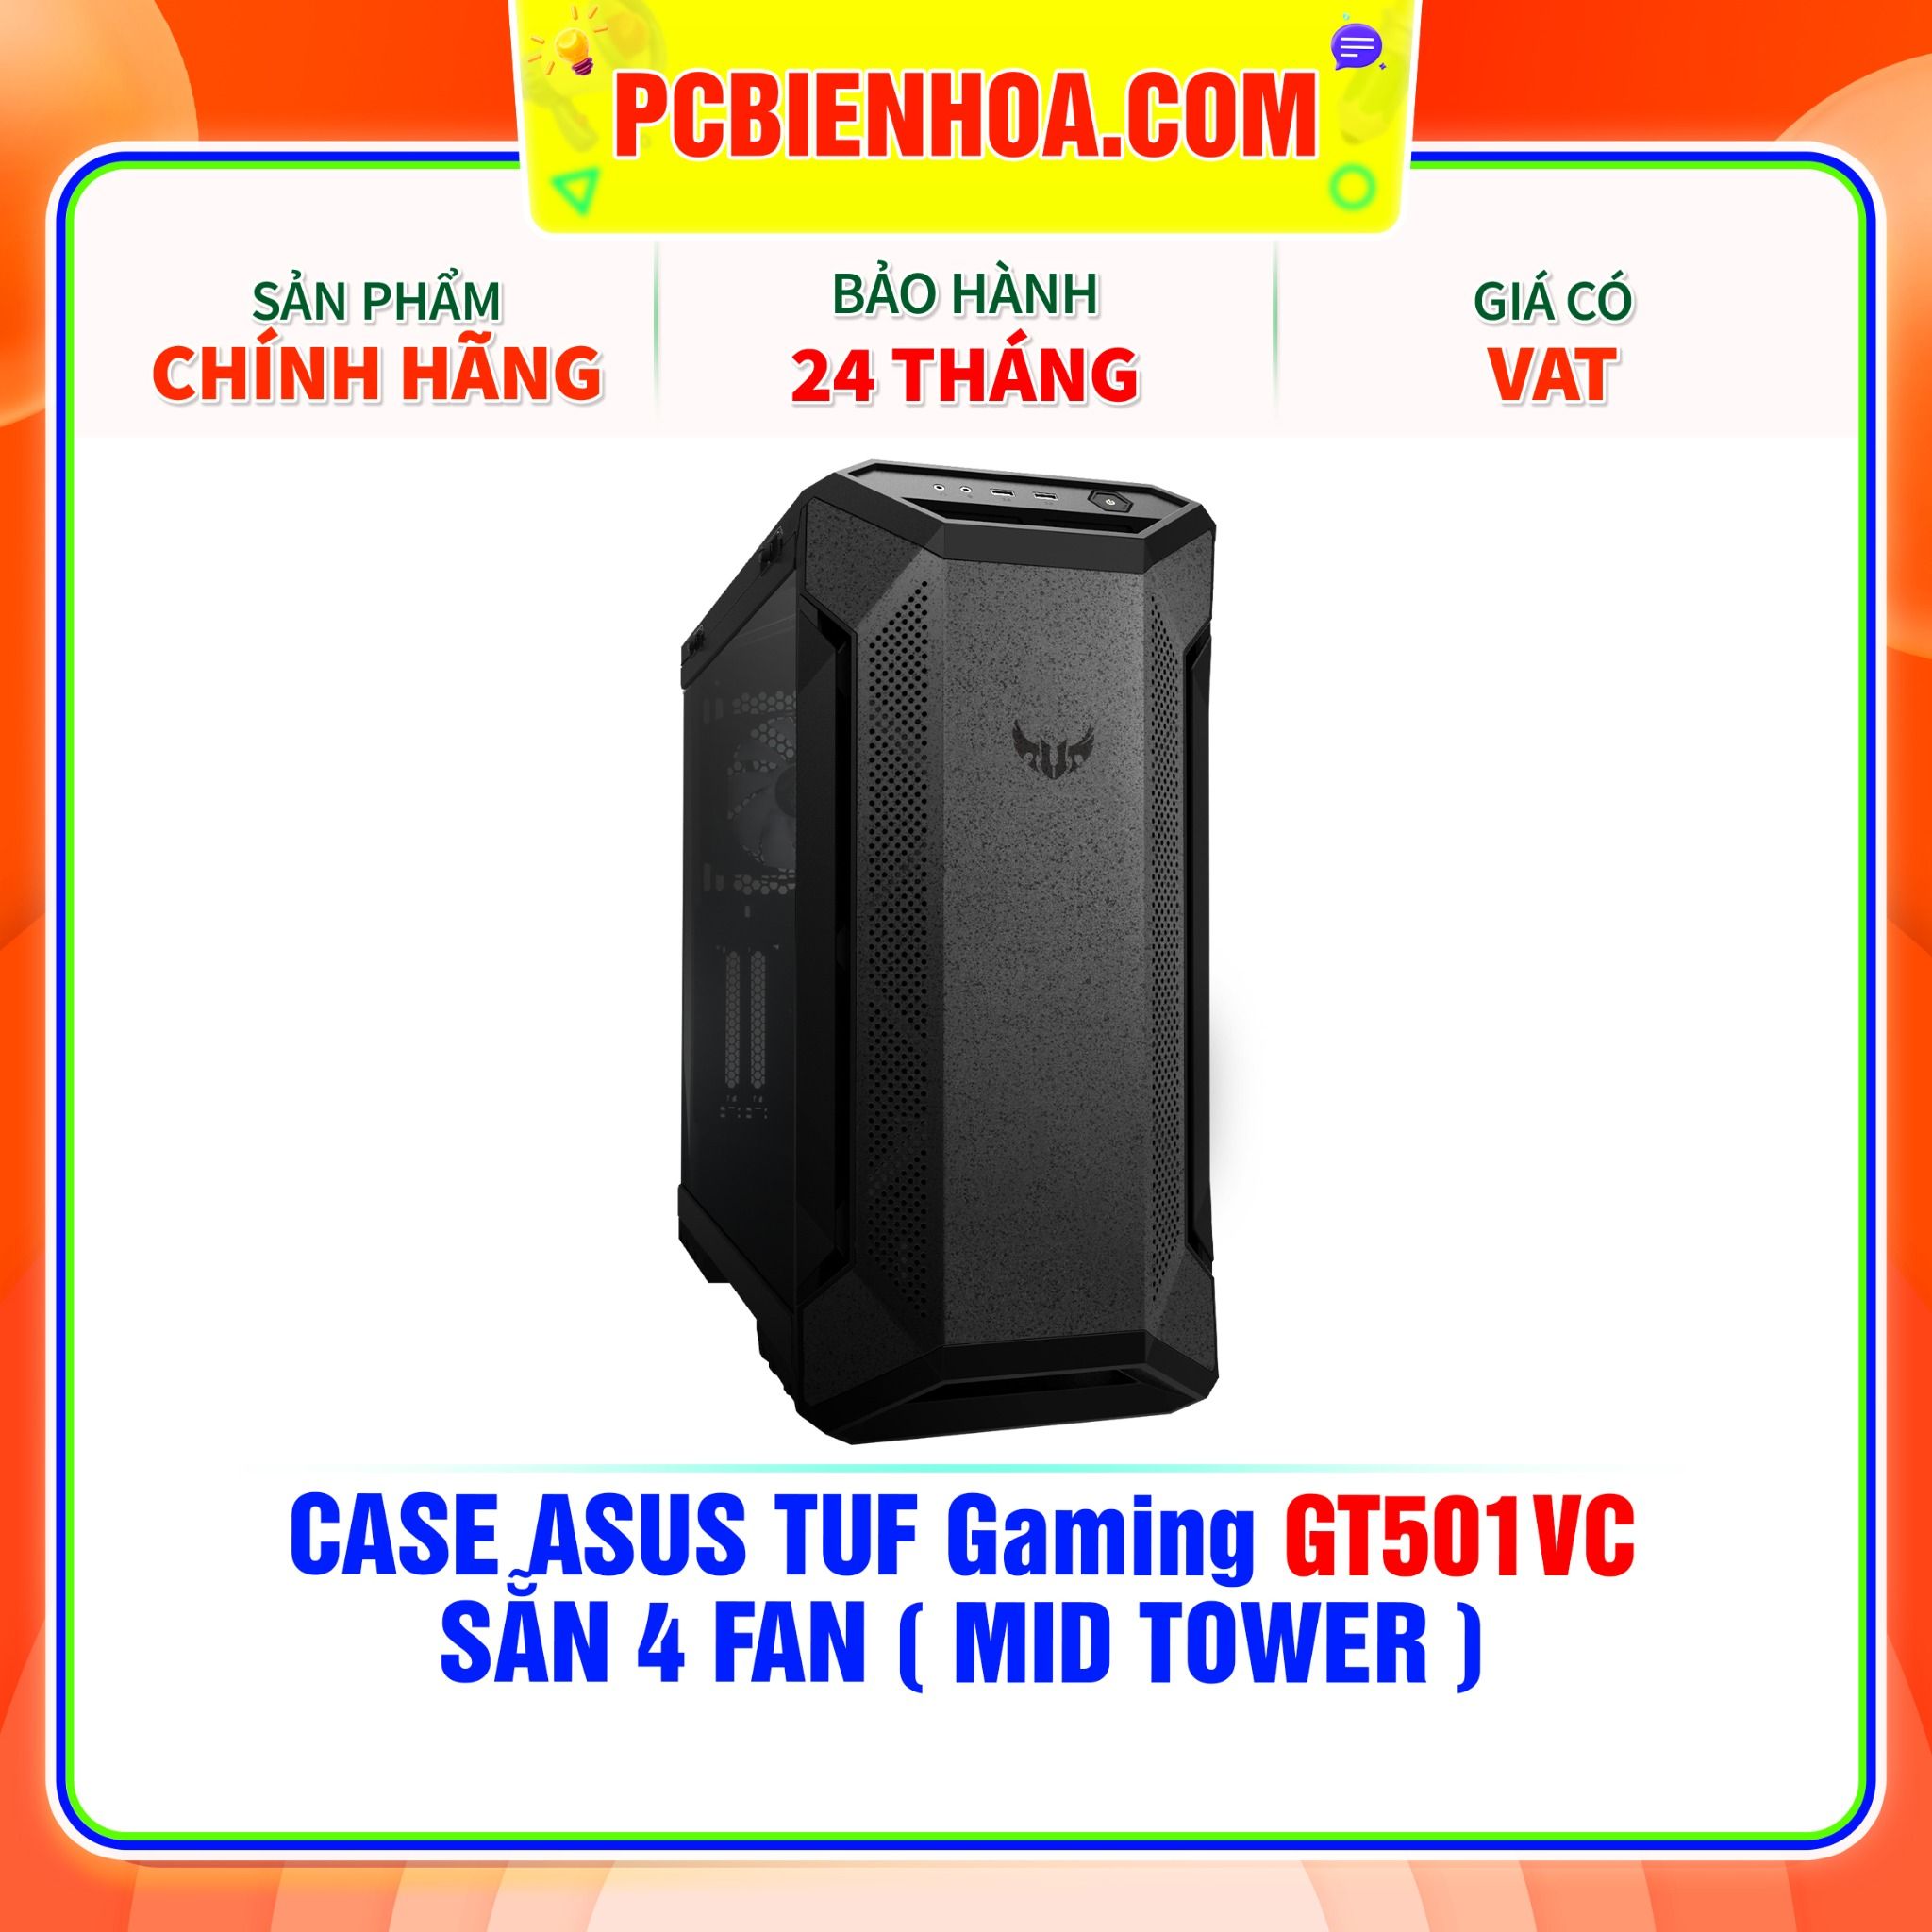  CASE ASUS TUF GAMING GT501VC - SẴN 4 FAN ( MID TOWER ) 